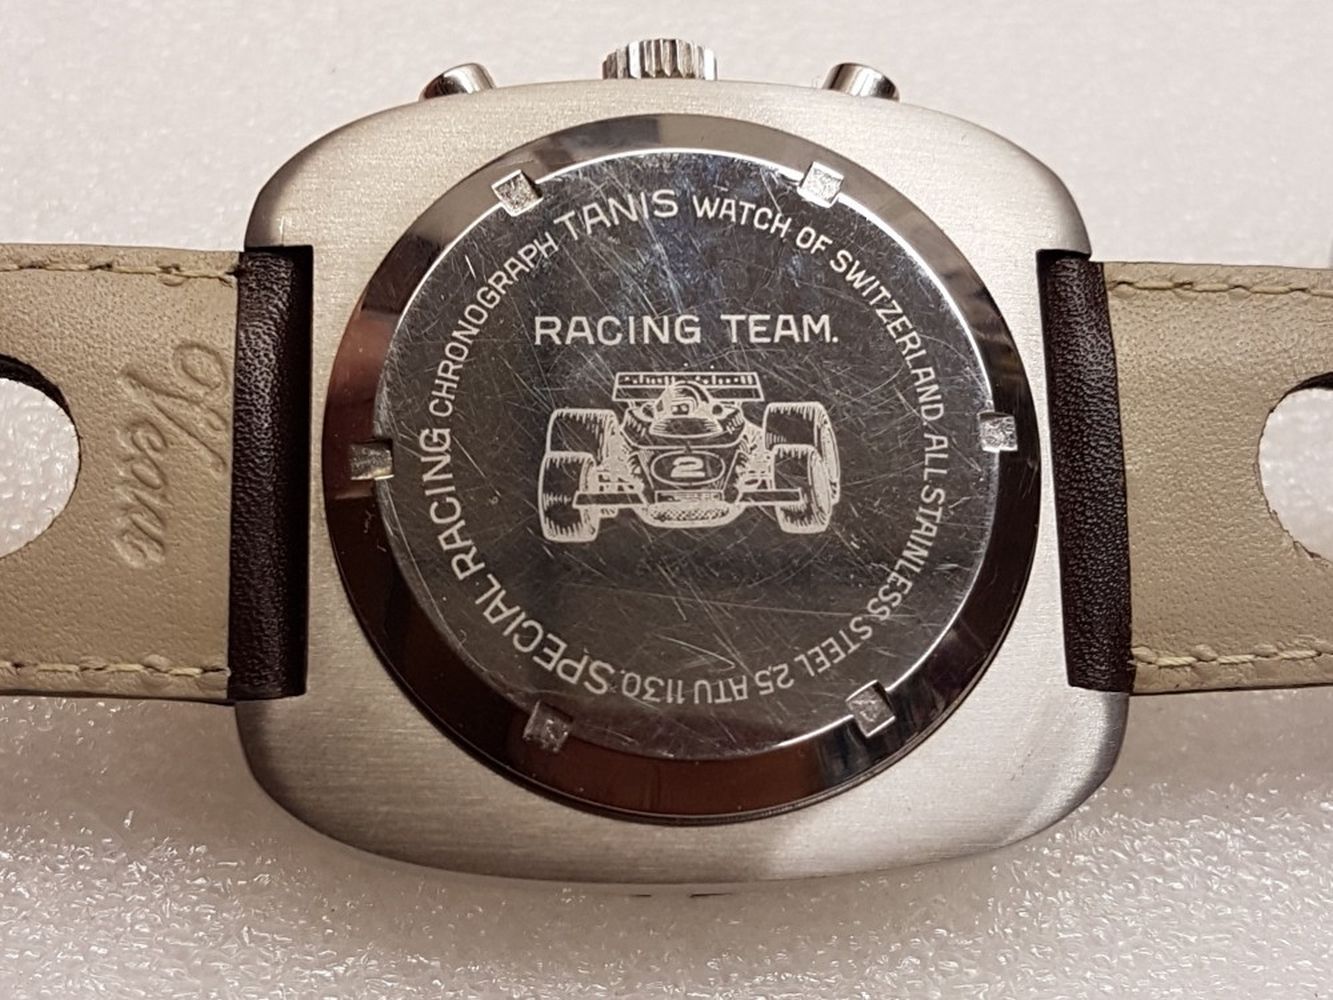 TANIS NOS SPECIAL RACING TEAM CHRONOGRAPH WITH BAKELITE BEZEL 1970S. VALJOUX CAL. 7734, square, - Image 7 of 8